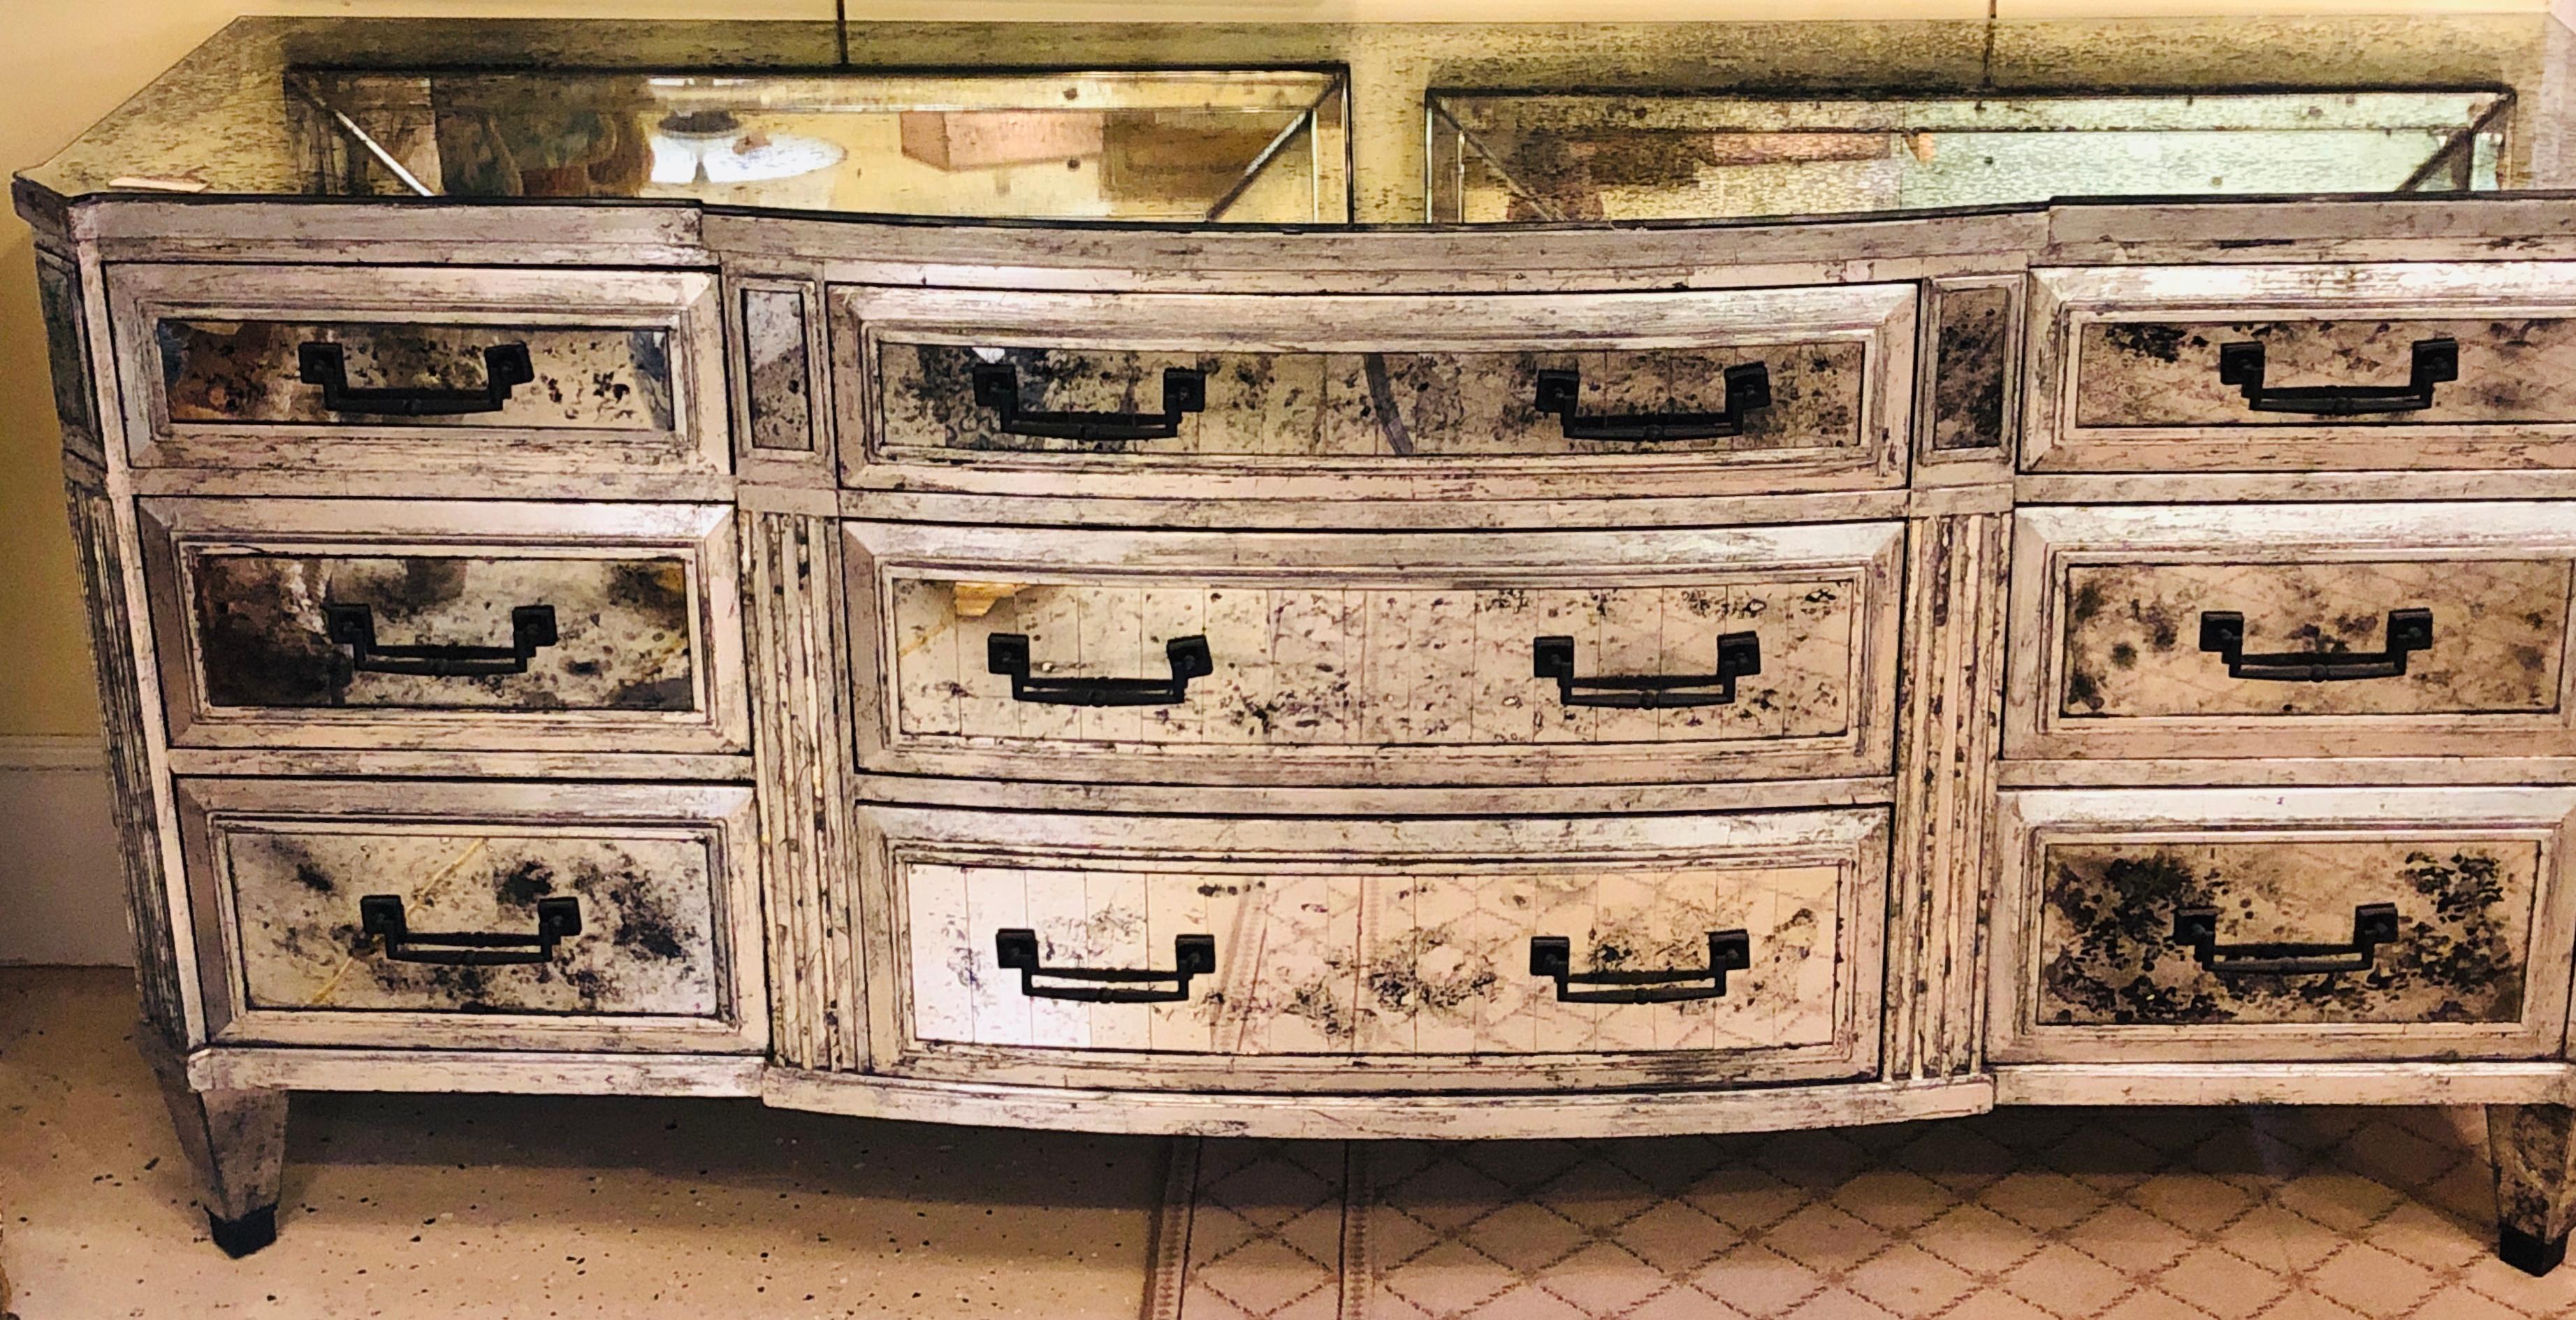 A stunning silver leafed and antiqued mirror designer Hollywood Regency bow front dresser sideboard. The antiqued mirror recessed into the fine silver leafed wood frame on this custom quality sideboard or triple dresser having nine drawers. The